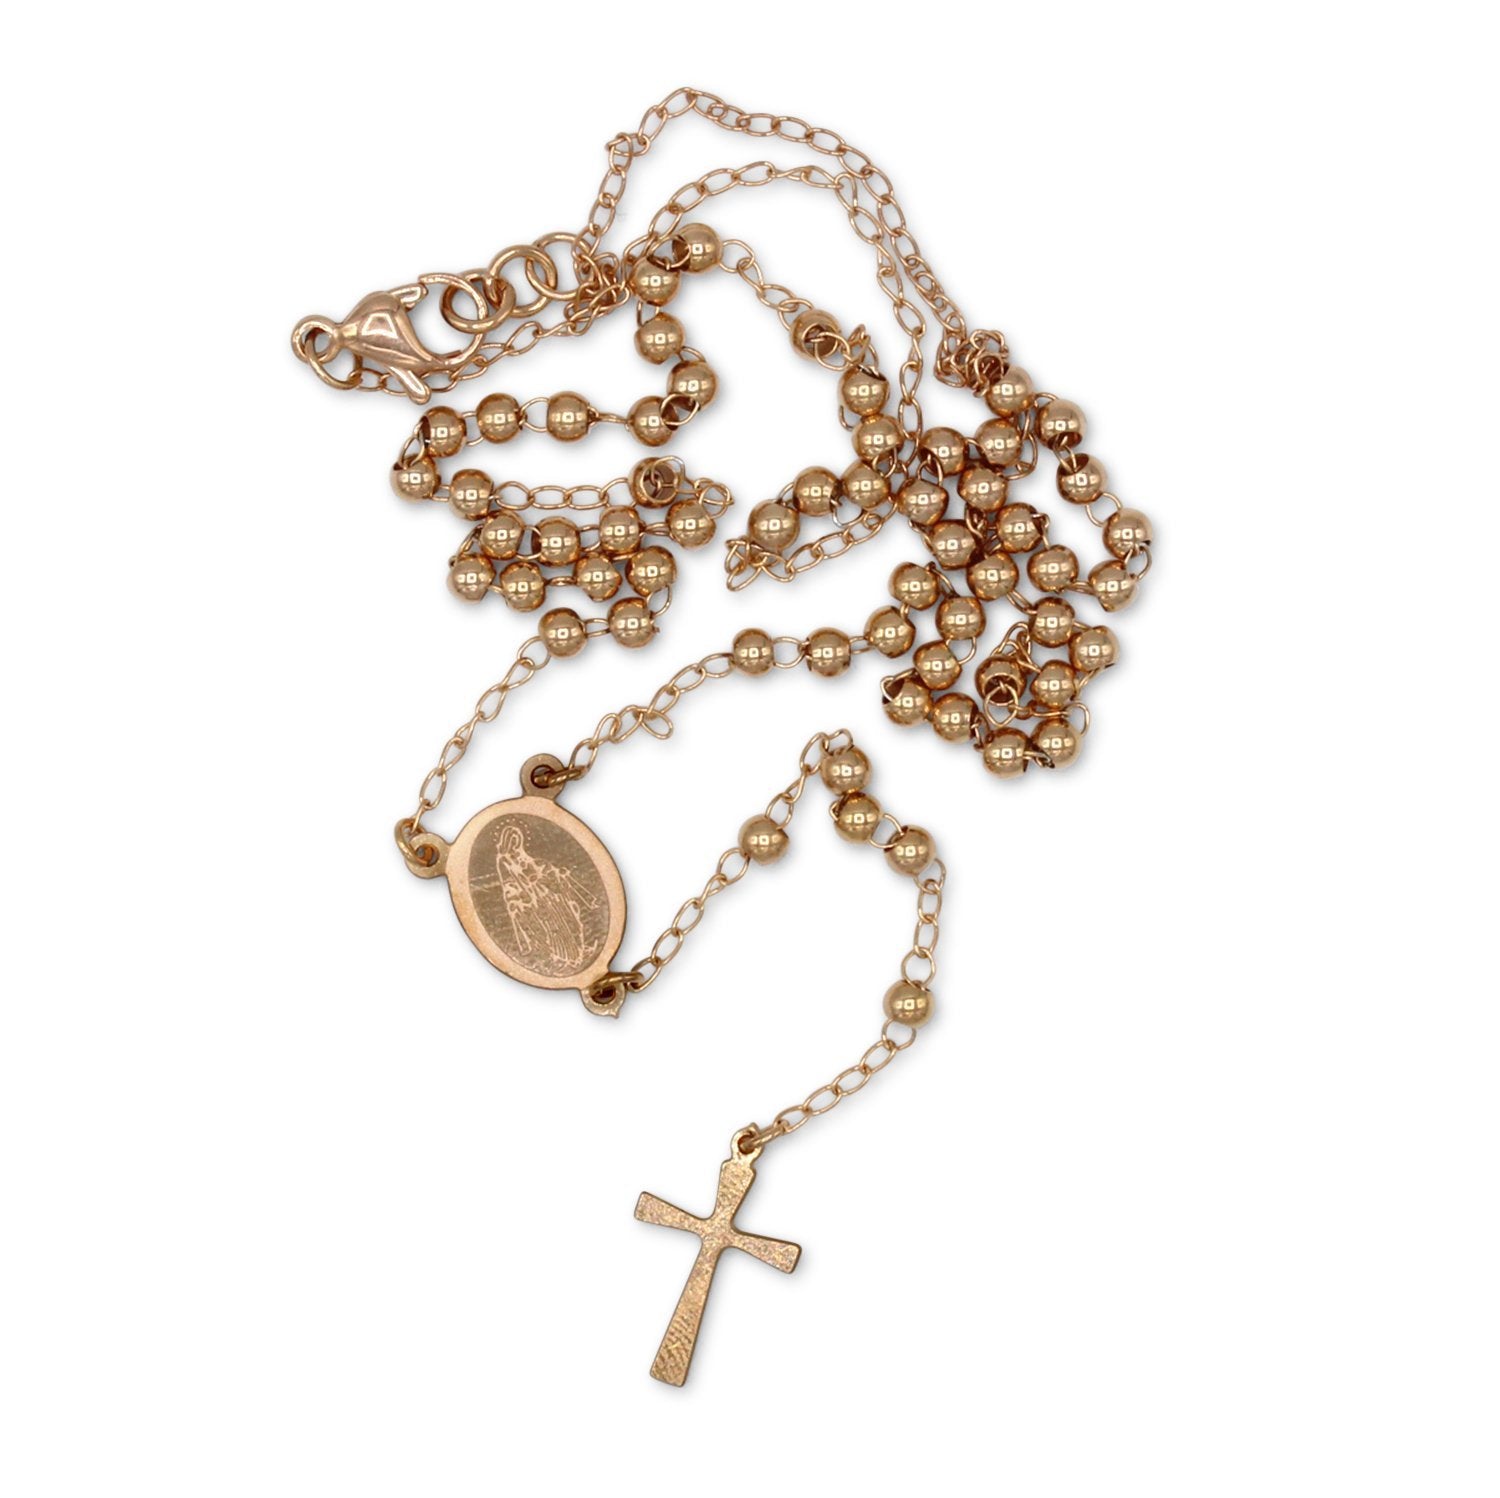 Traditional Rose Gold Rosary Necklace Five Decade Catholic Prayer Beads 3mm